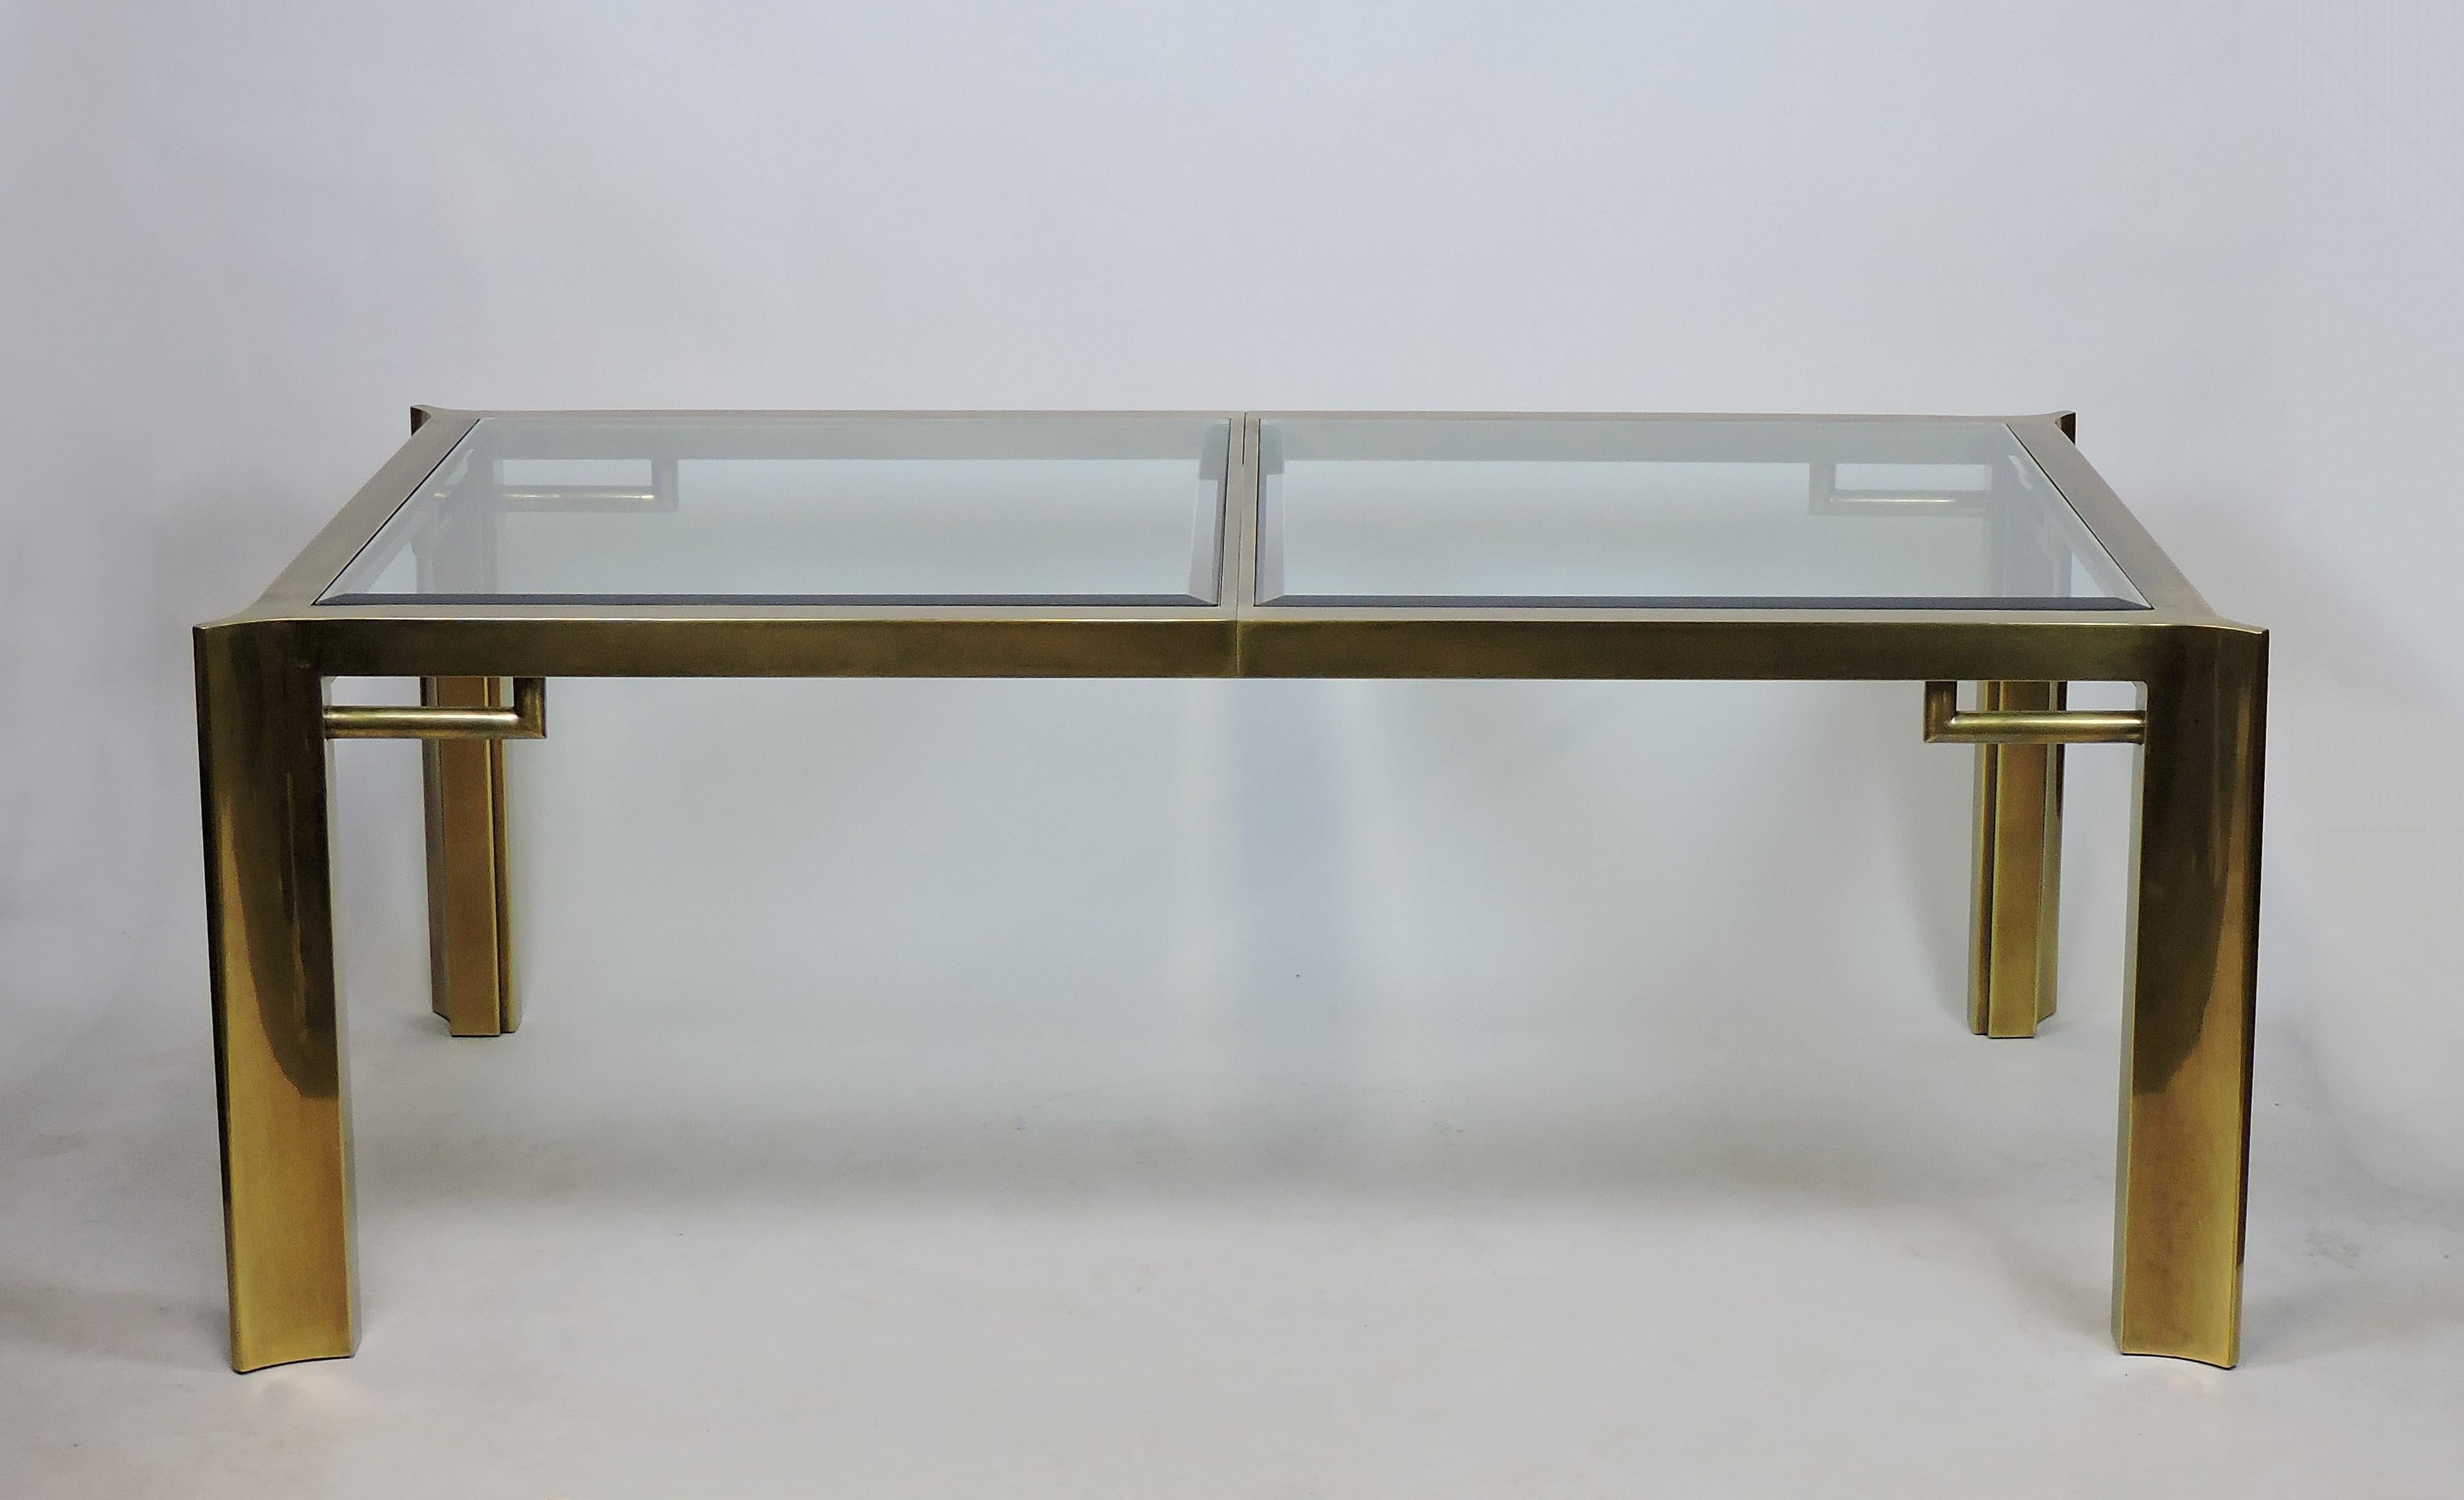 Impressive and elegant Mastercraft dining table. This table is made of solid brass with heavy beveled clear glass inserts and was designed by the co-founder of Mastercraft, William Doezma. When the leaf is installed, the table extends to a very